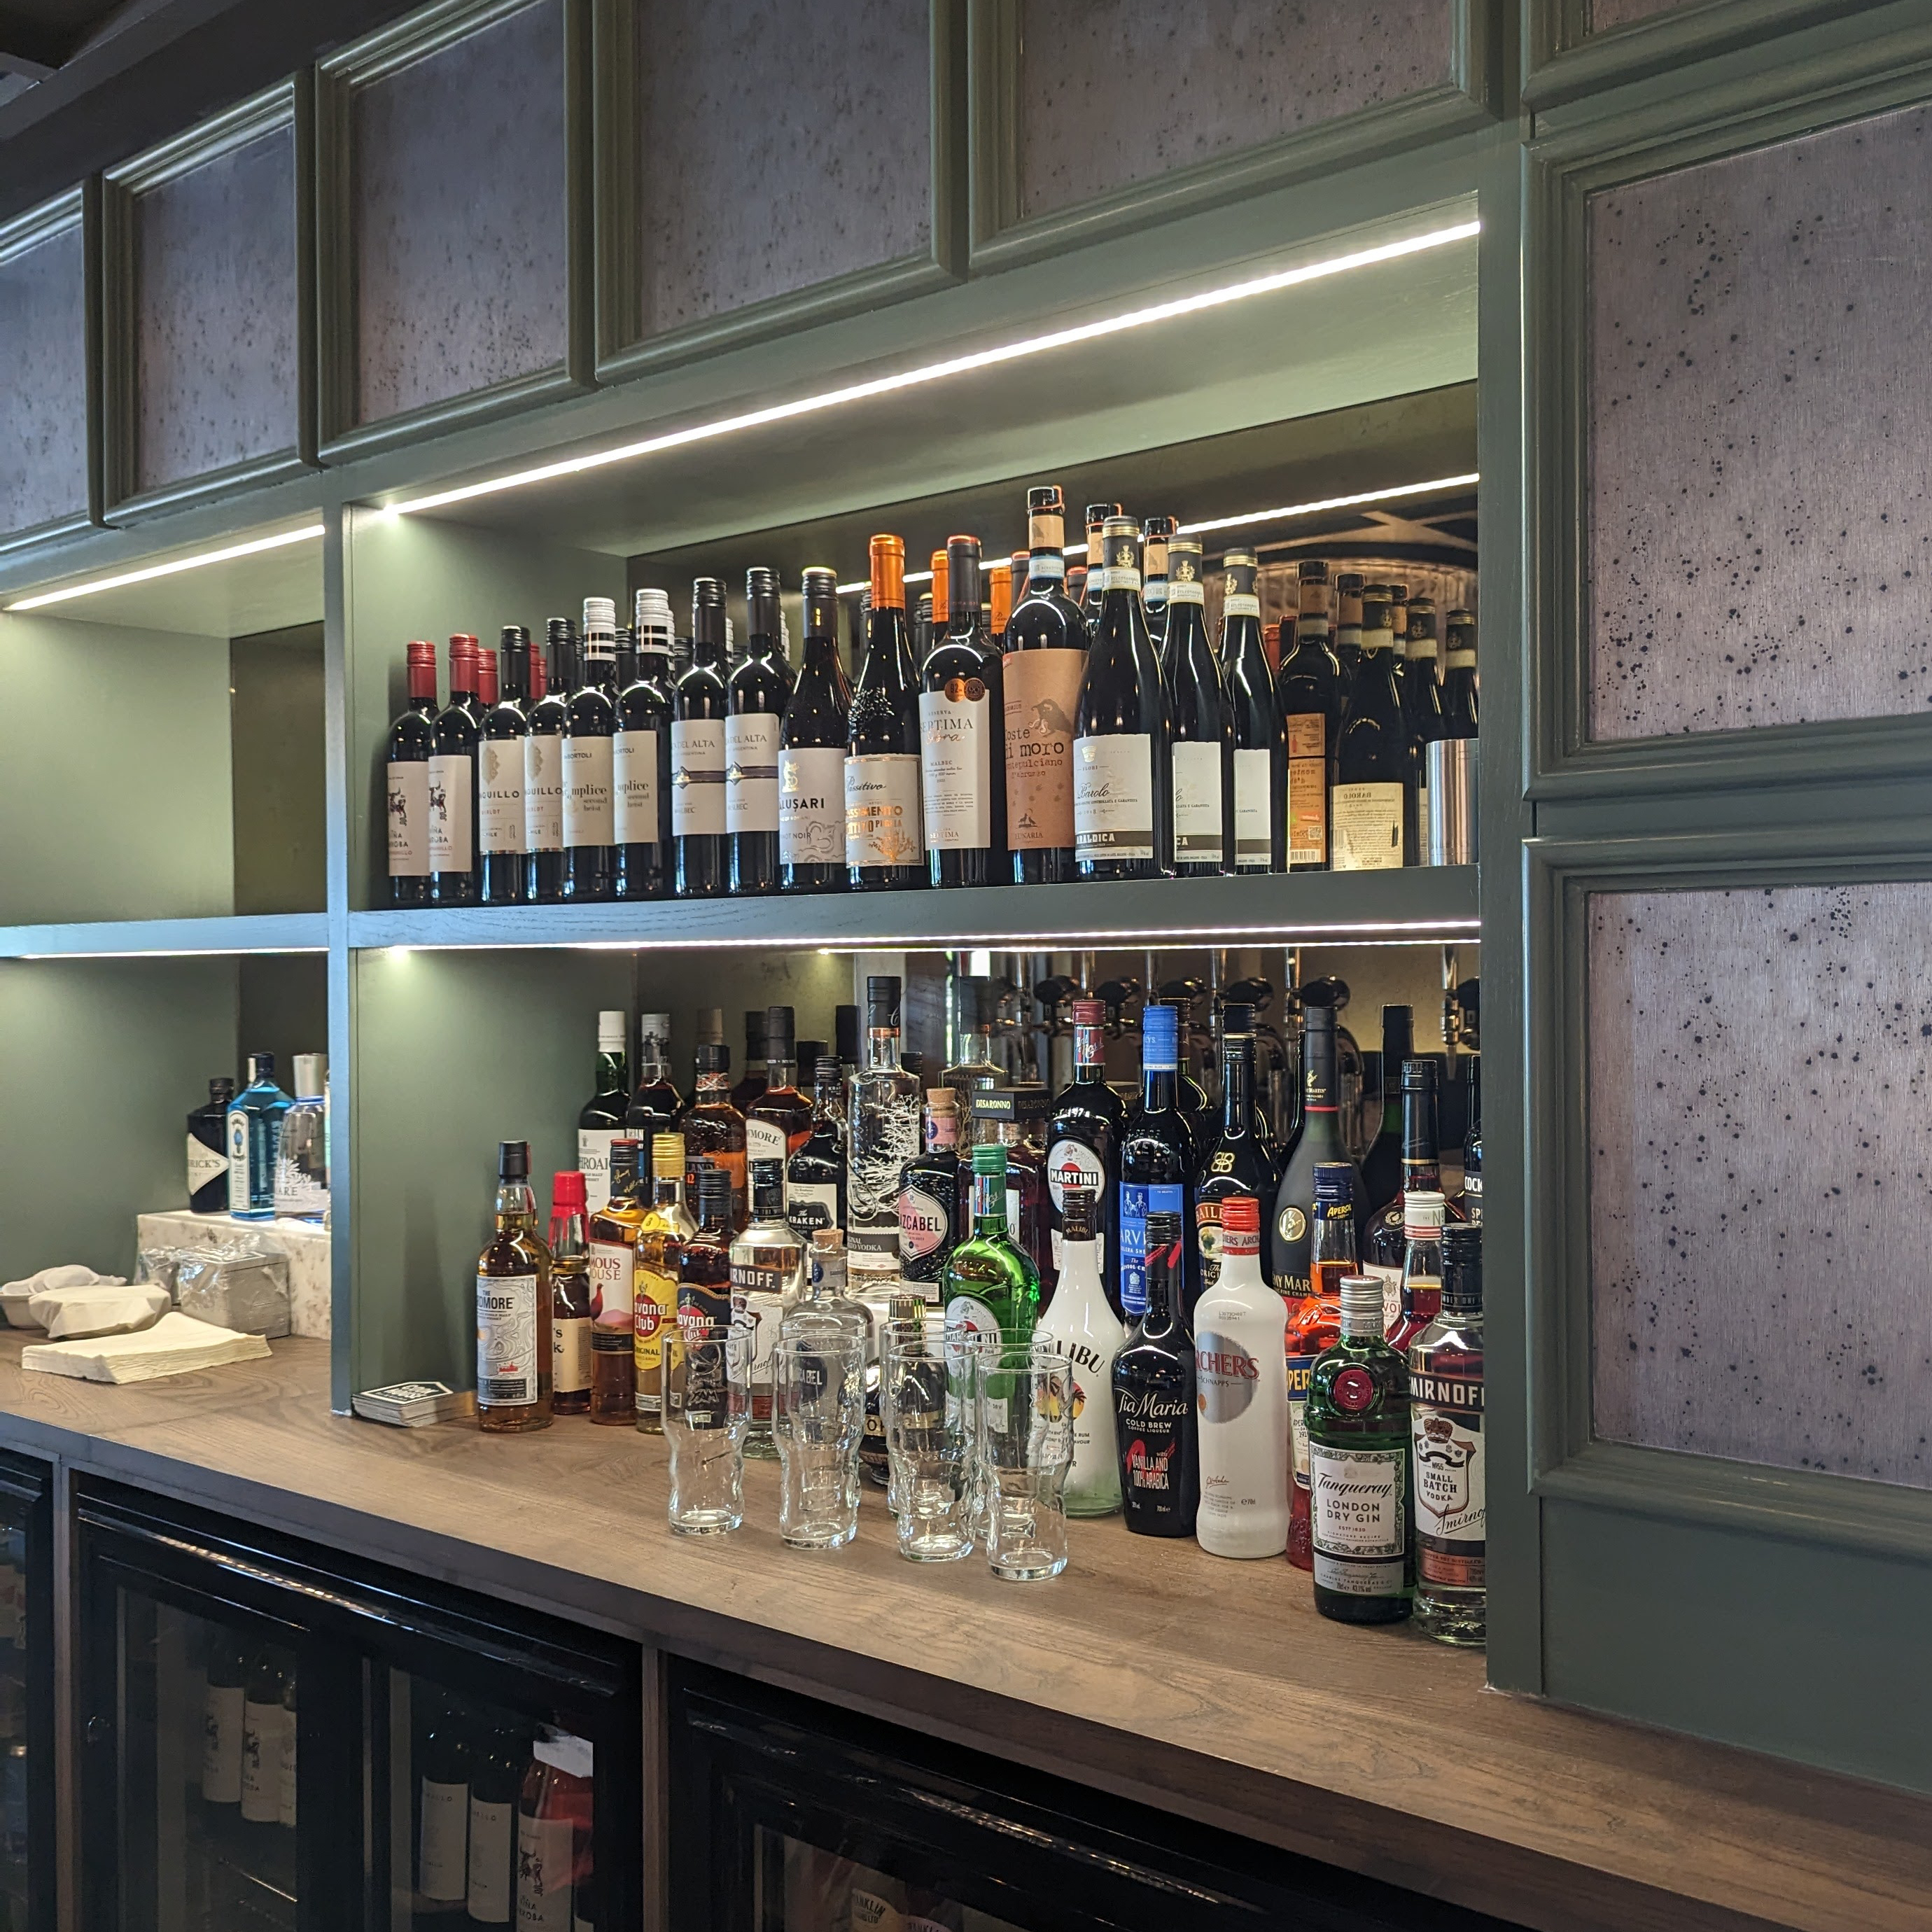 A view of the shelves behind the bar of Cook House Bar & Kitchen, on the shelves are bottles of wines and spirits.